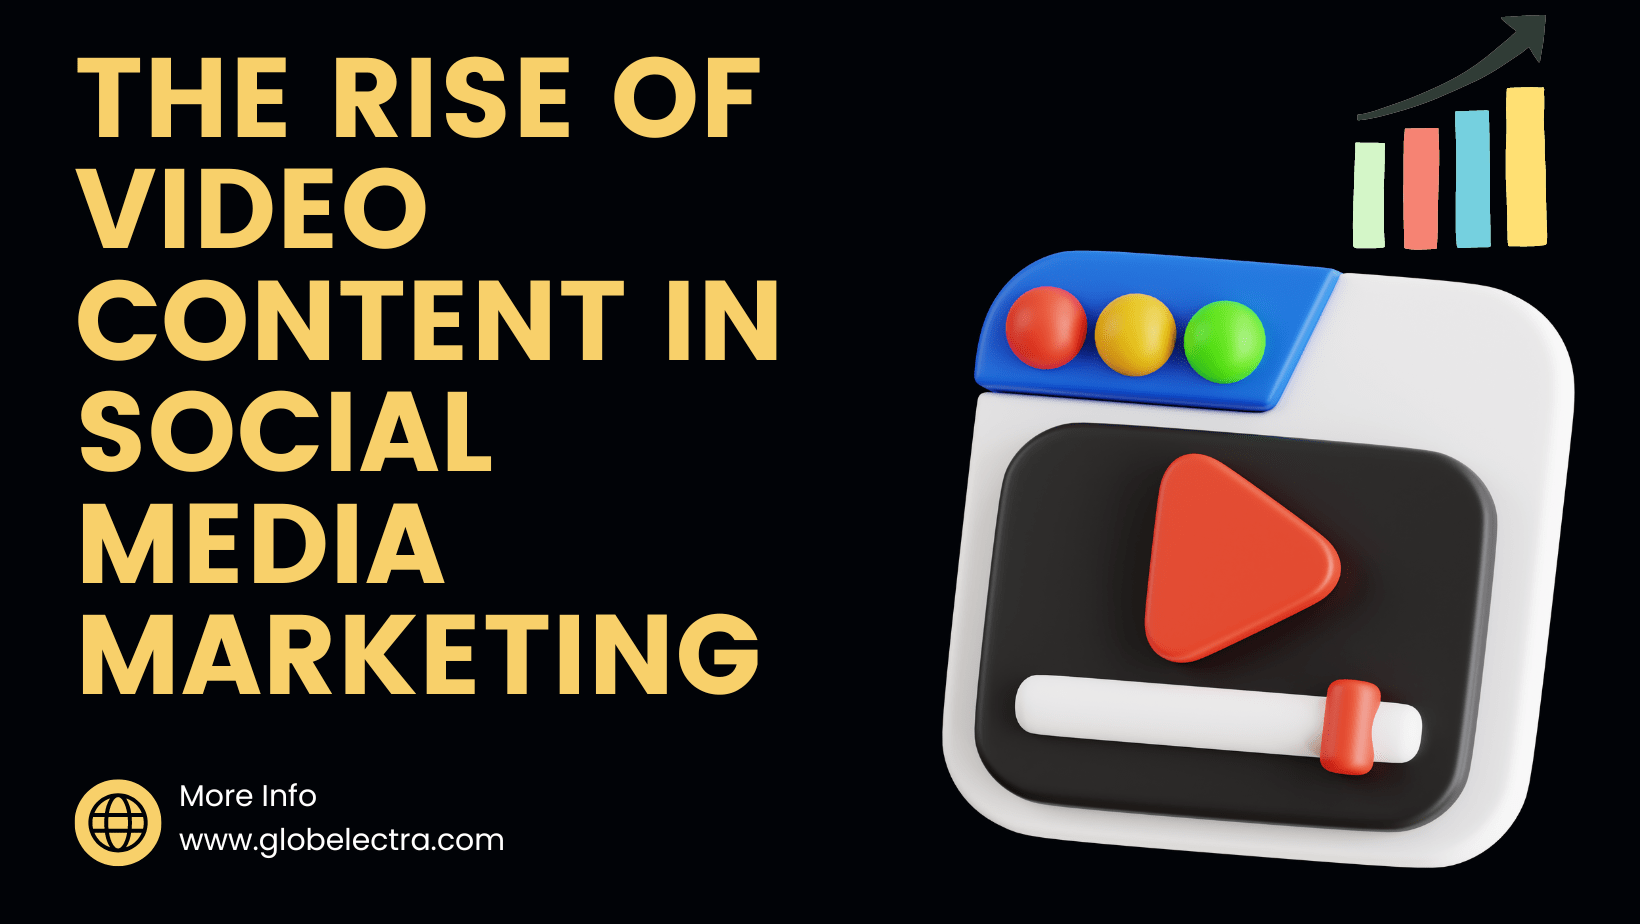 The Rise of Video Content in Social Media Marketing